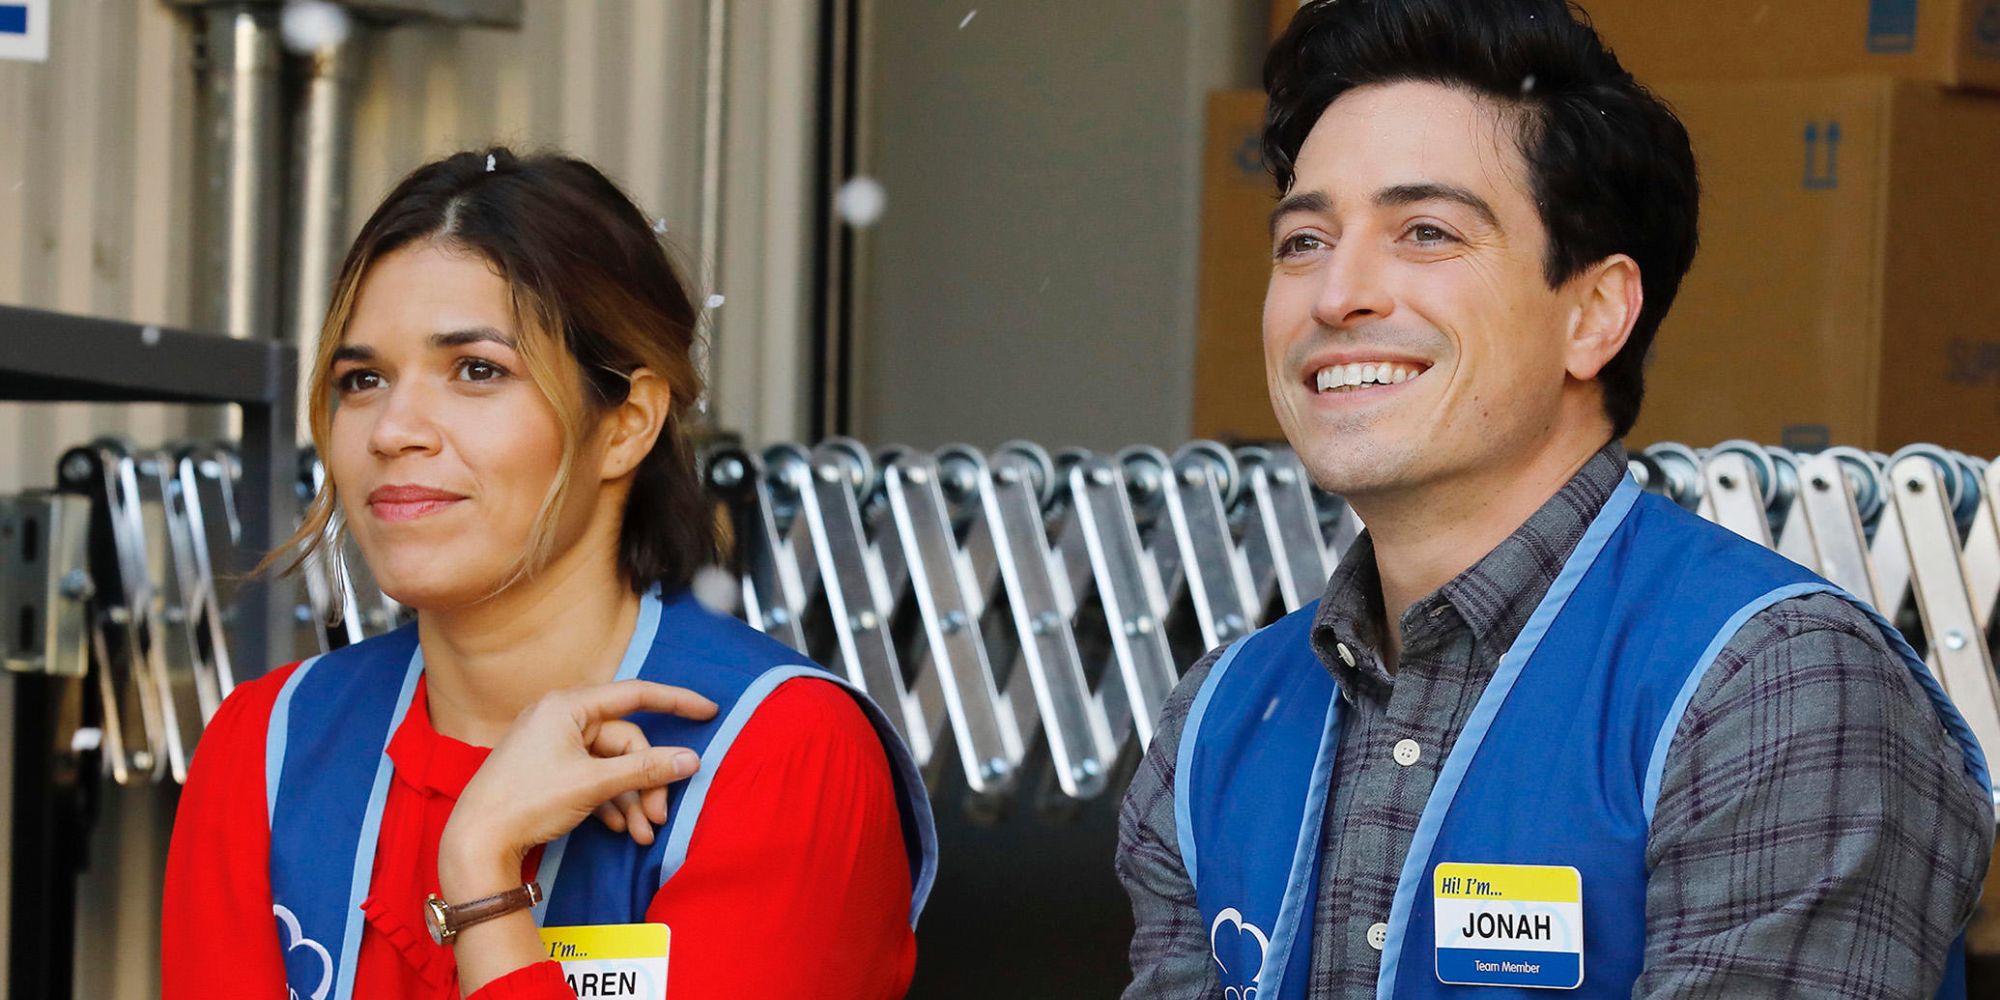 Superstore Amy and Jonah together